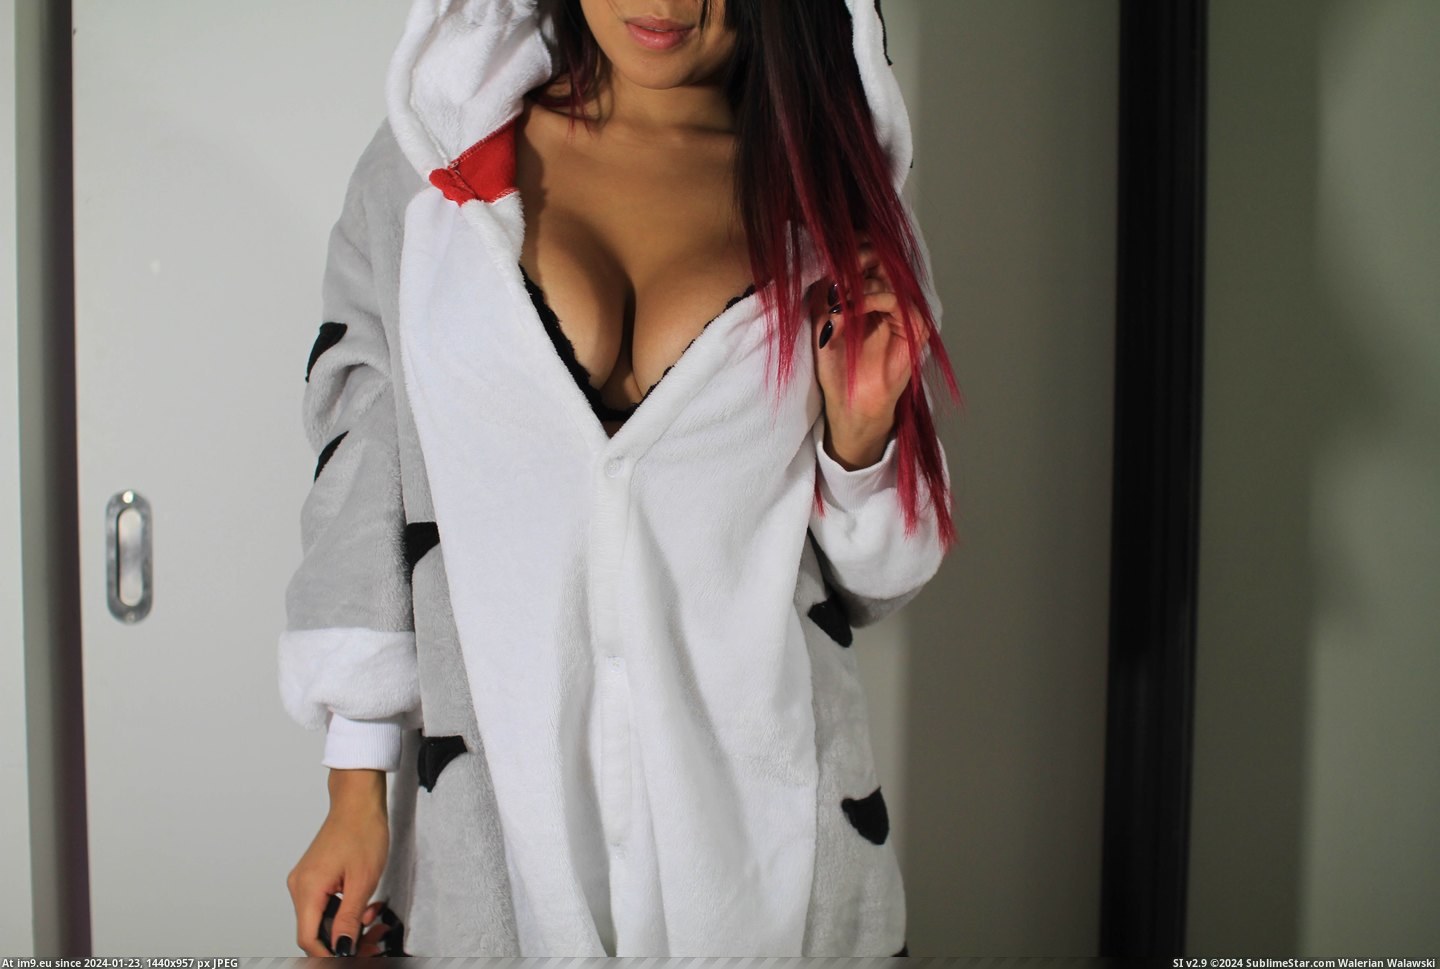 #Sexy #Was #How #Told #Onesie #Cat #Way [Gonewild] I was told there was no way I could make my cat onesie sexy, how'd I do GW? [f] 4 Pic. (Bild von album My r/GONEWILD favs))